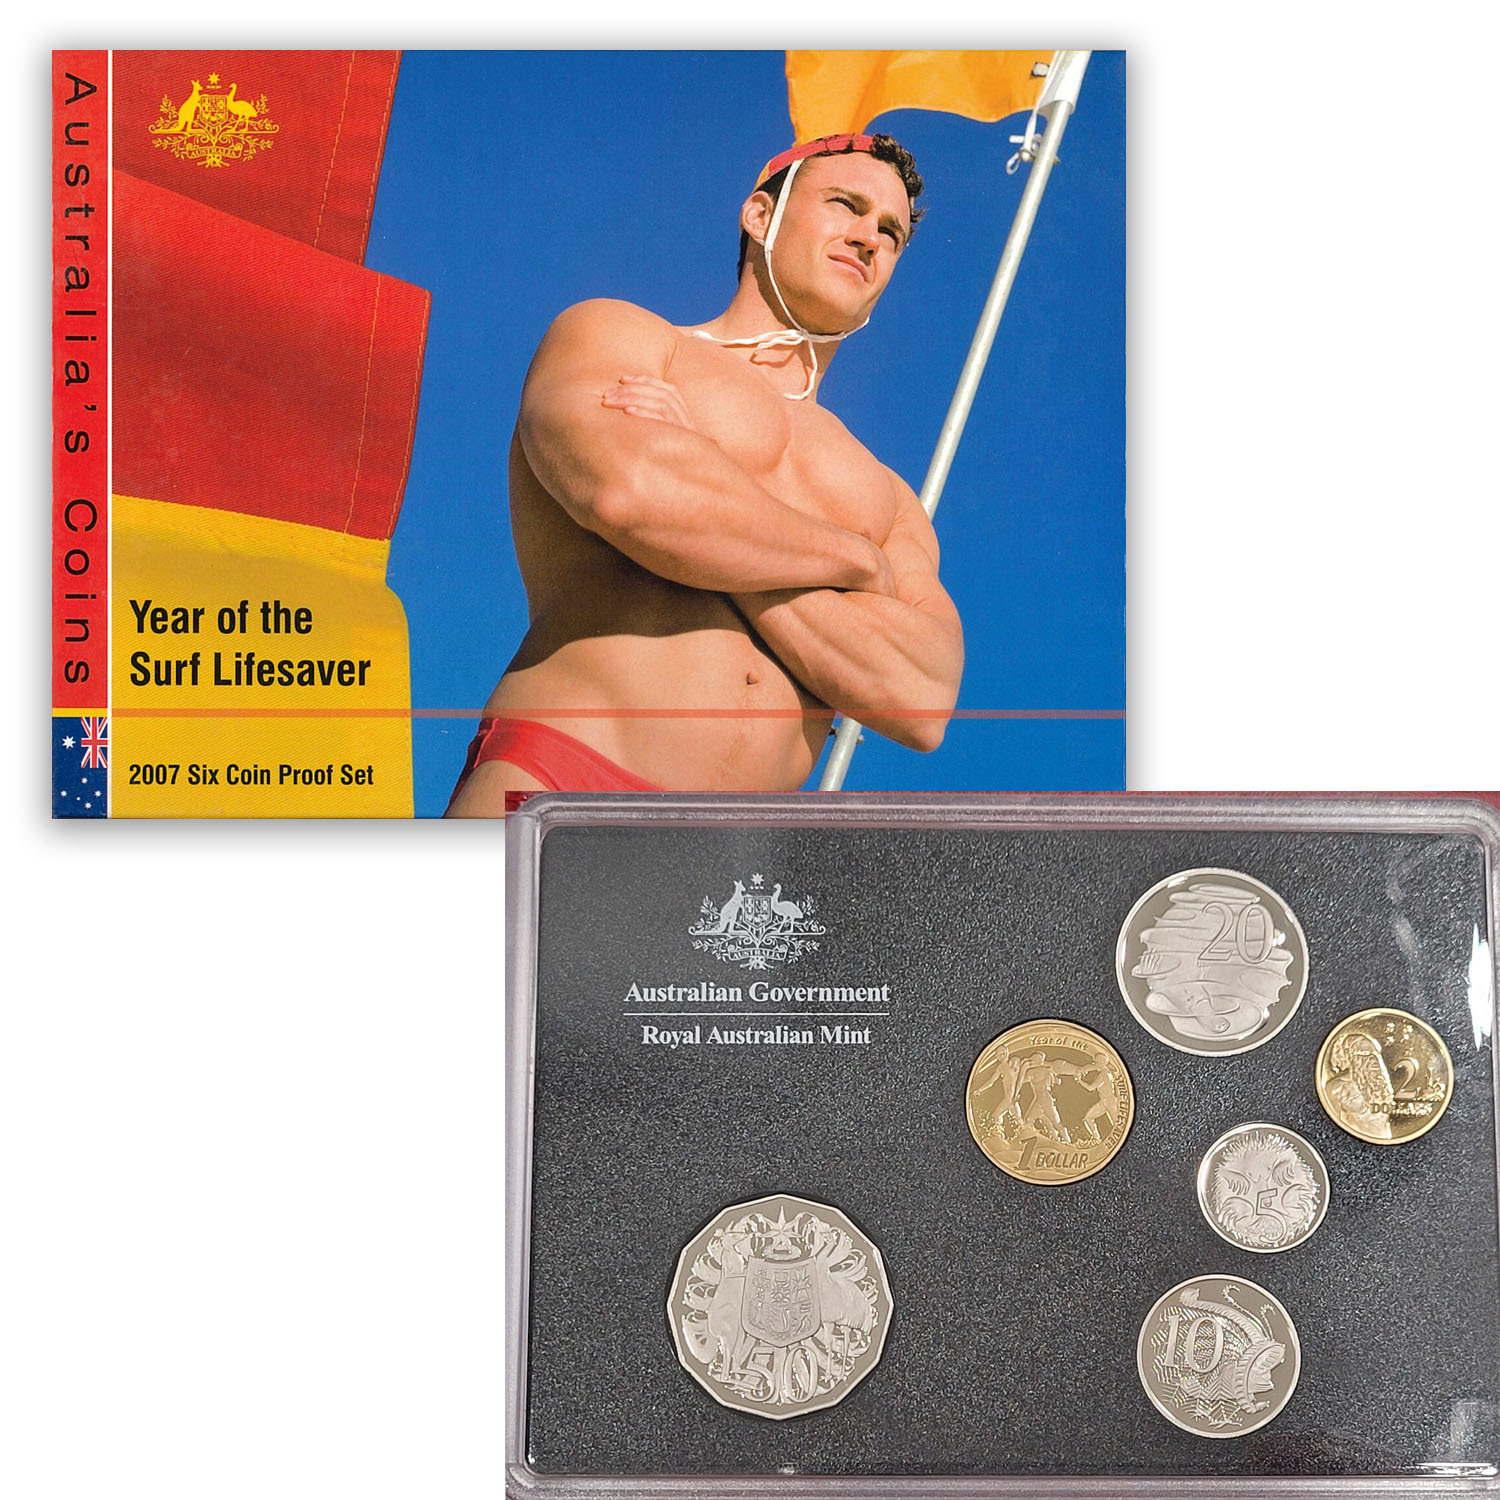 Details about   2007 Australia Six Coin Proof Set RAM Year of the Surf Lifesaver